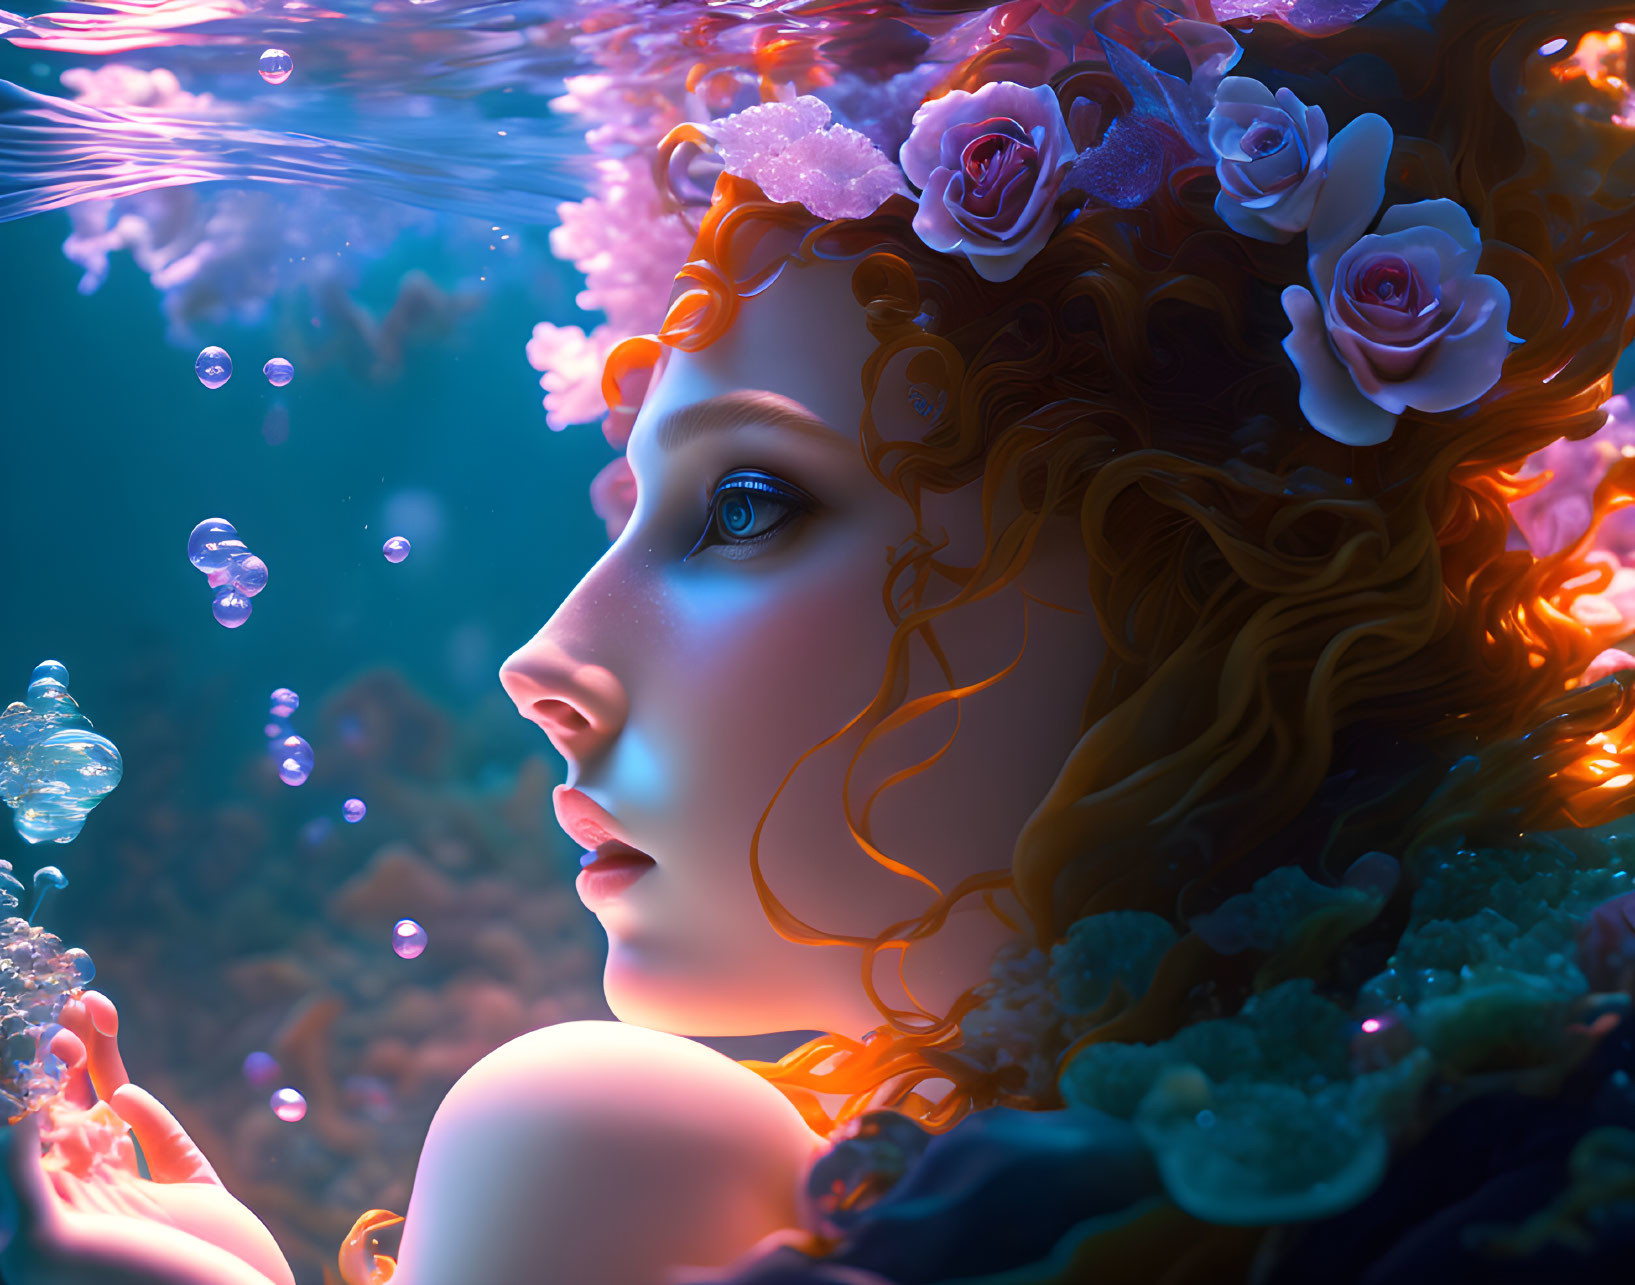 Digital Artwork: Woman Submerged in Water with Floral Headdress and Coral Colors